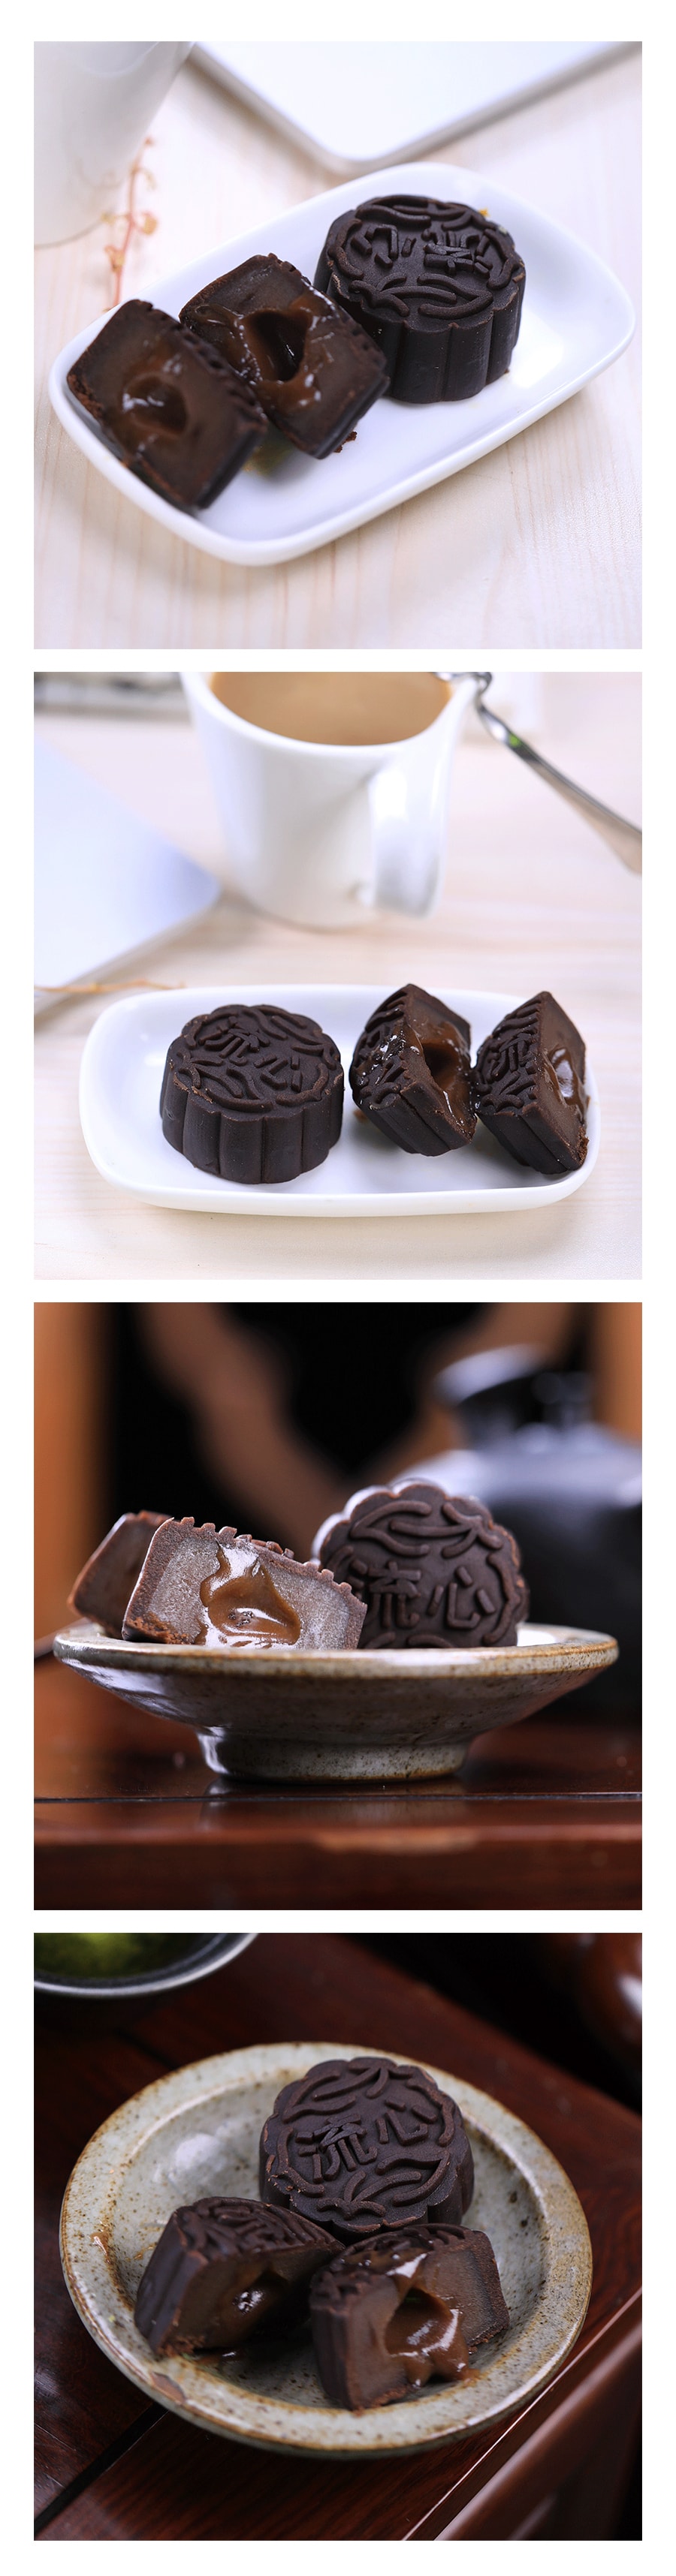 ONETANG Moon Cake Lava Chocolate 100g 【Delivery Date: Mid August】